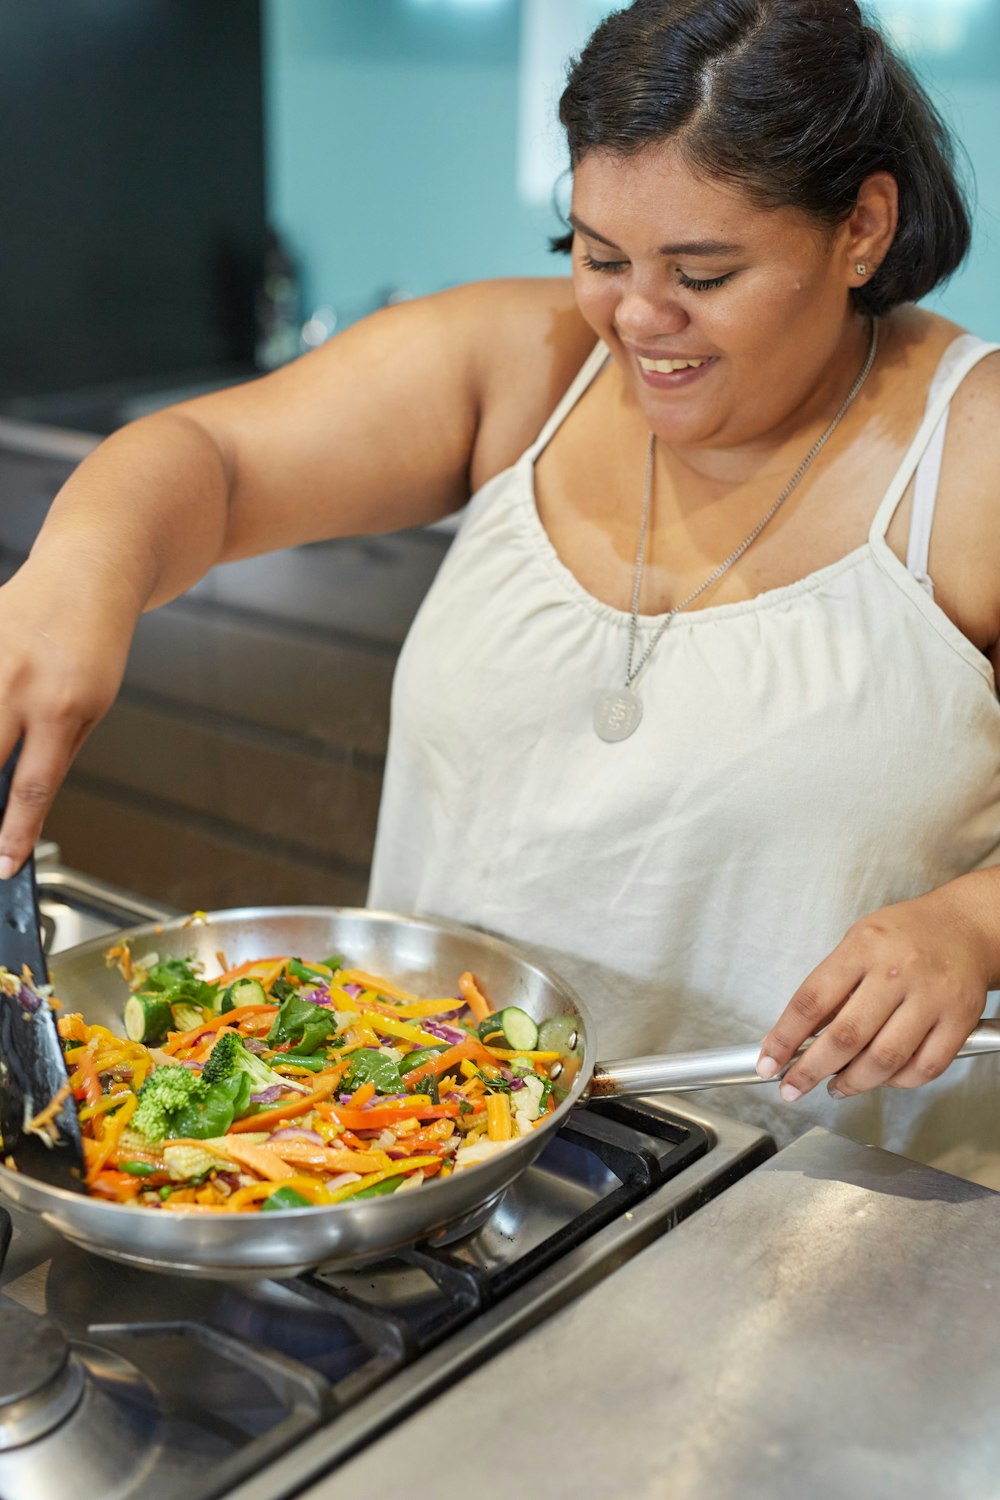 a woman in a white tank top preparing food on a stove